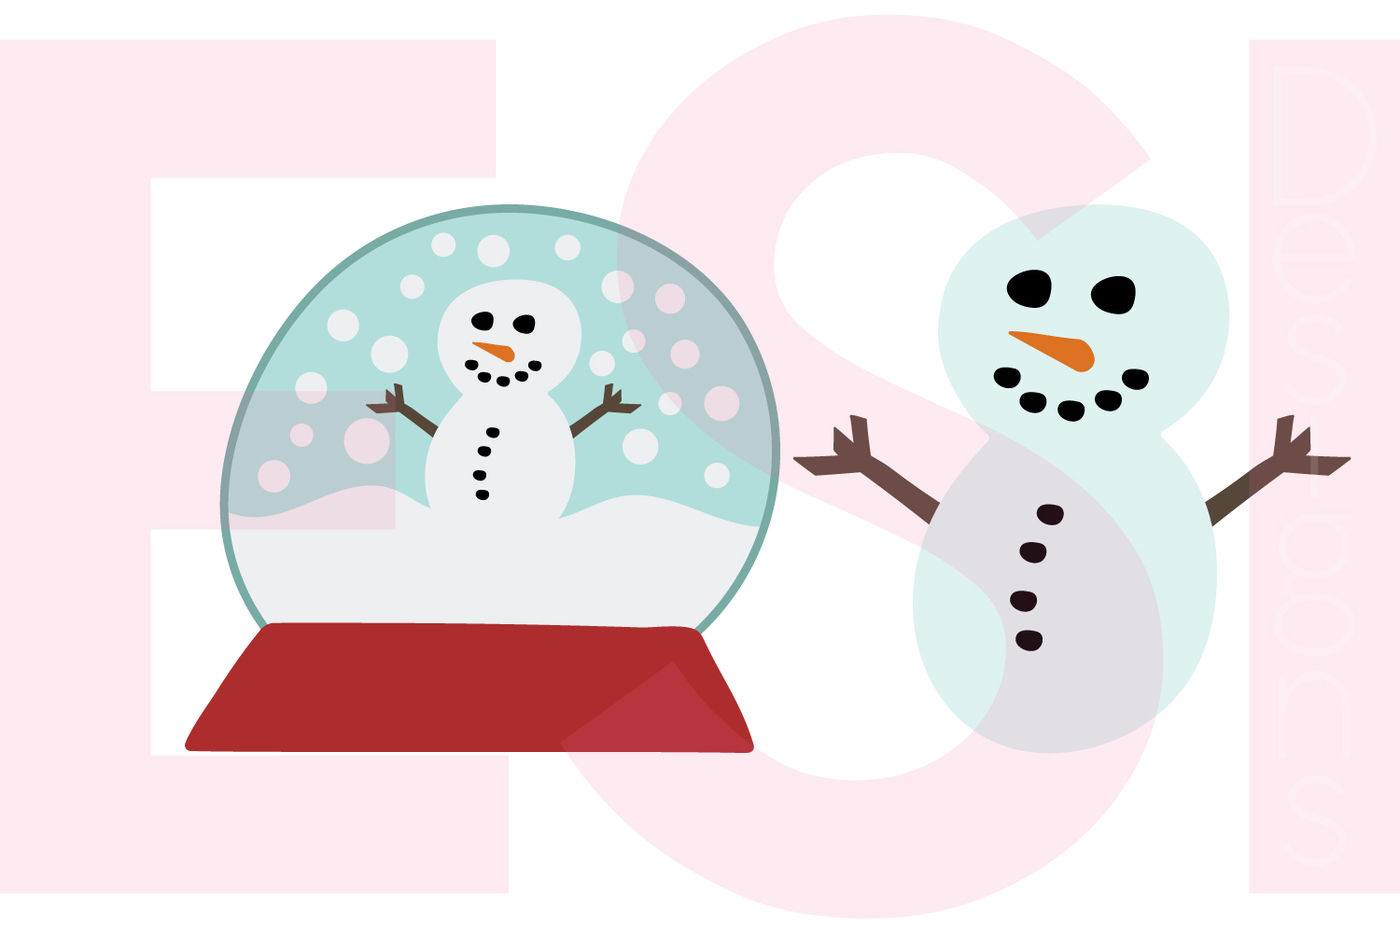 Download Snowman Snow Globe Design Set 1 No Hat Svg Dxf Eps Png Cutting Files By Esi Designs Thehungryjpeg Com